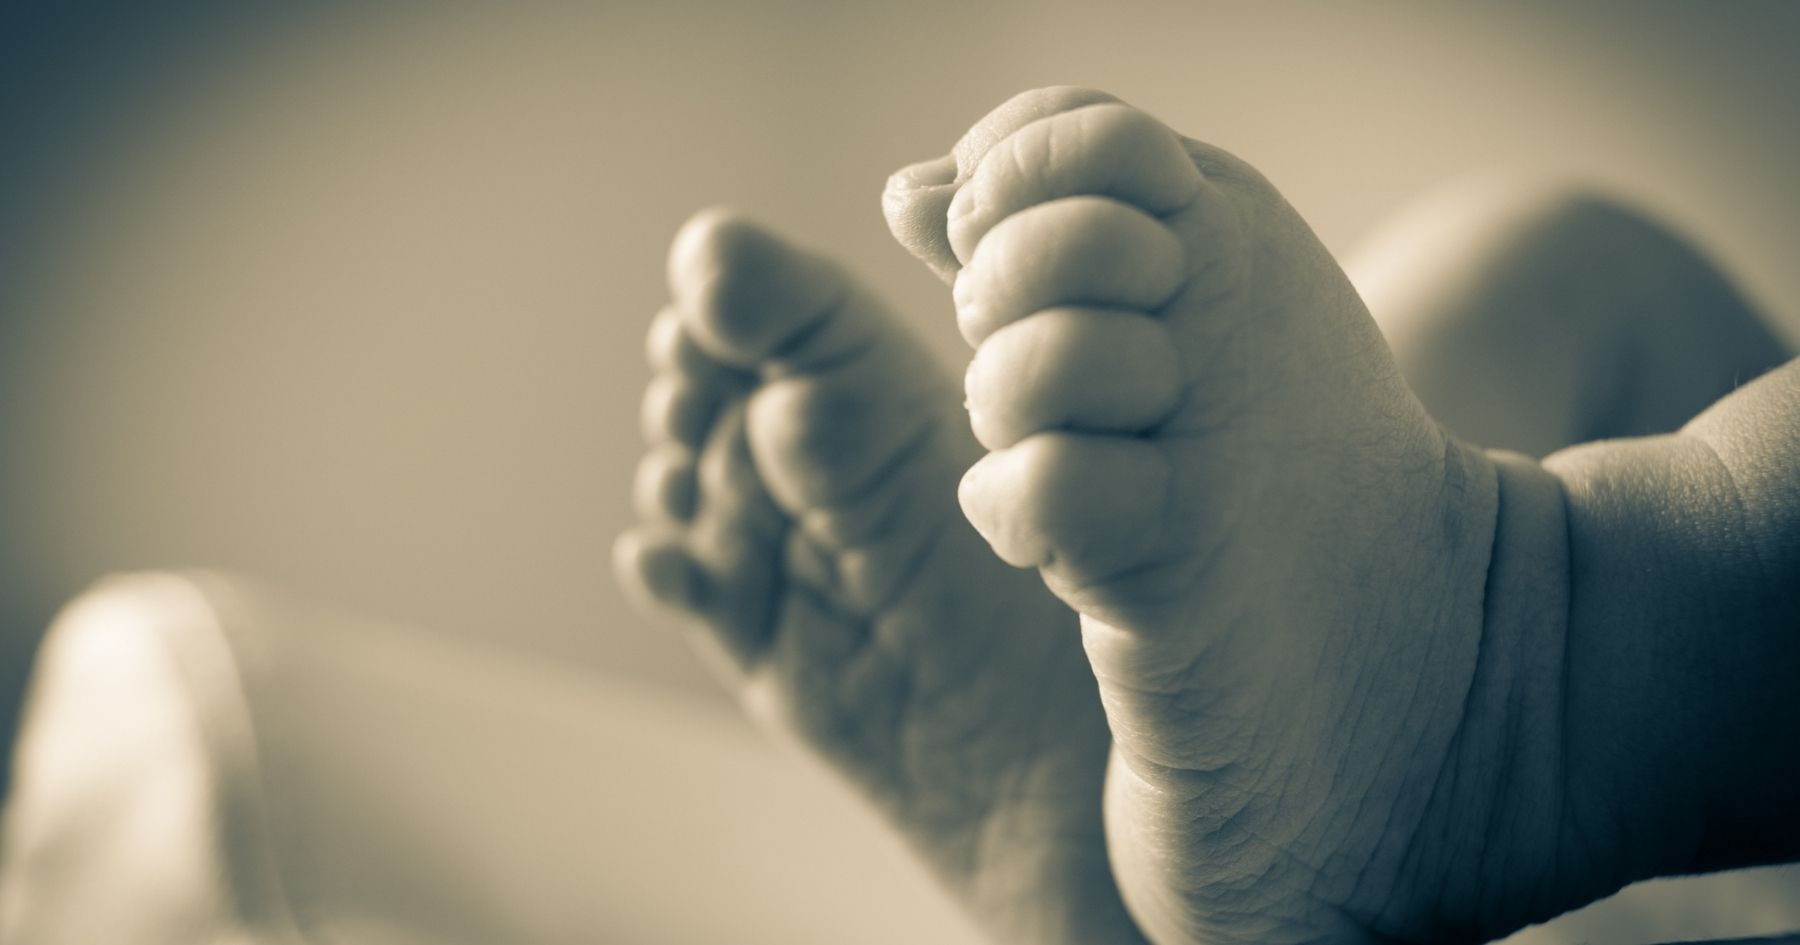 Mum watched baby son slowly die over 10 hours after failed abortion